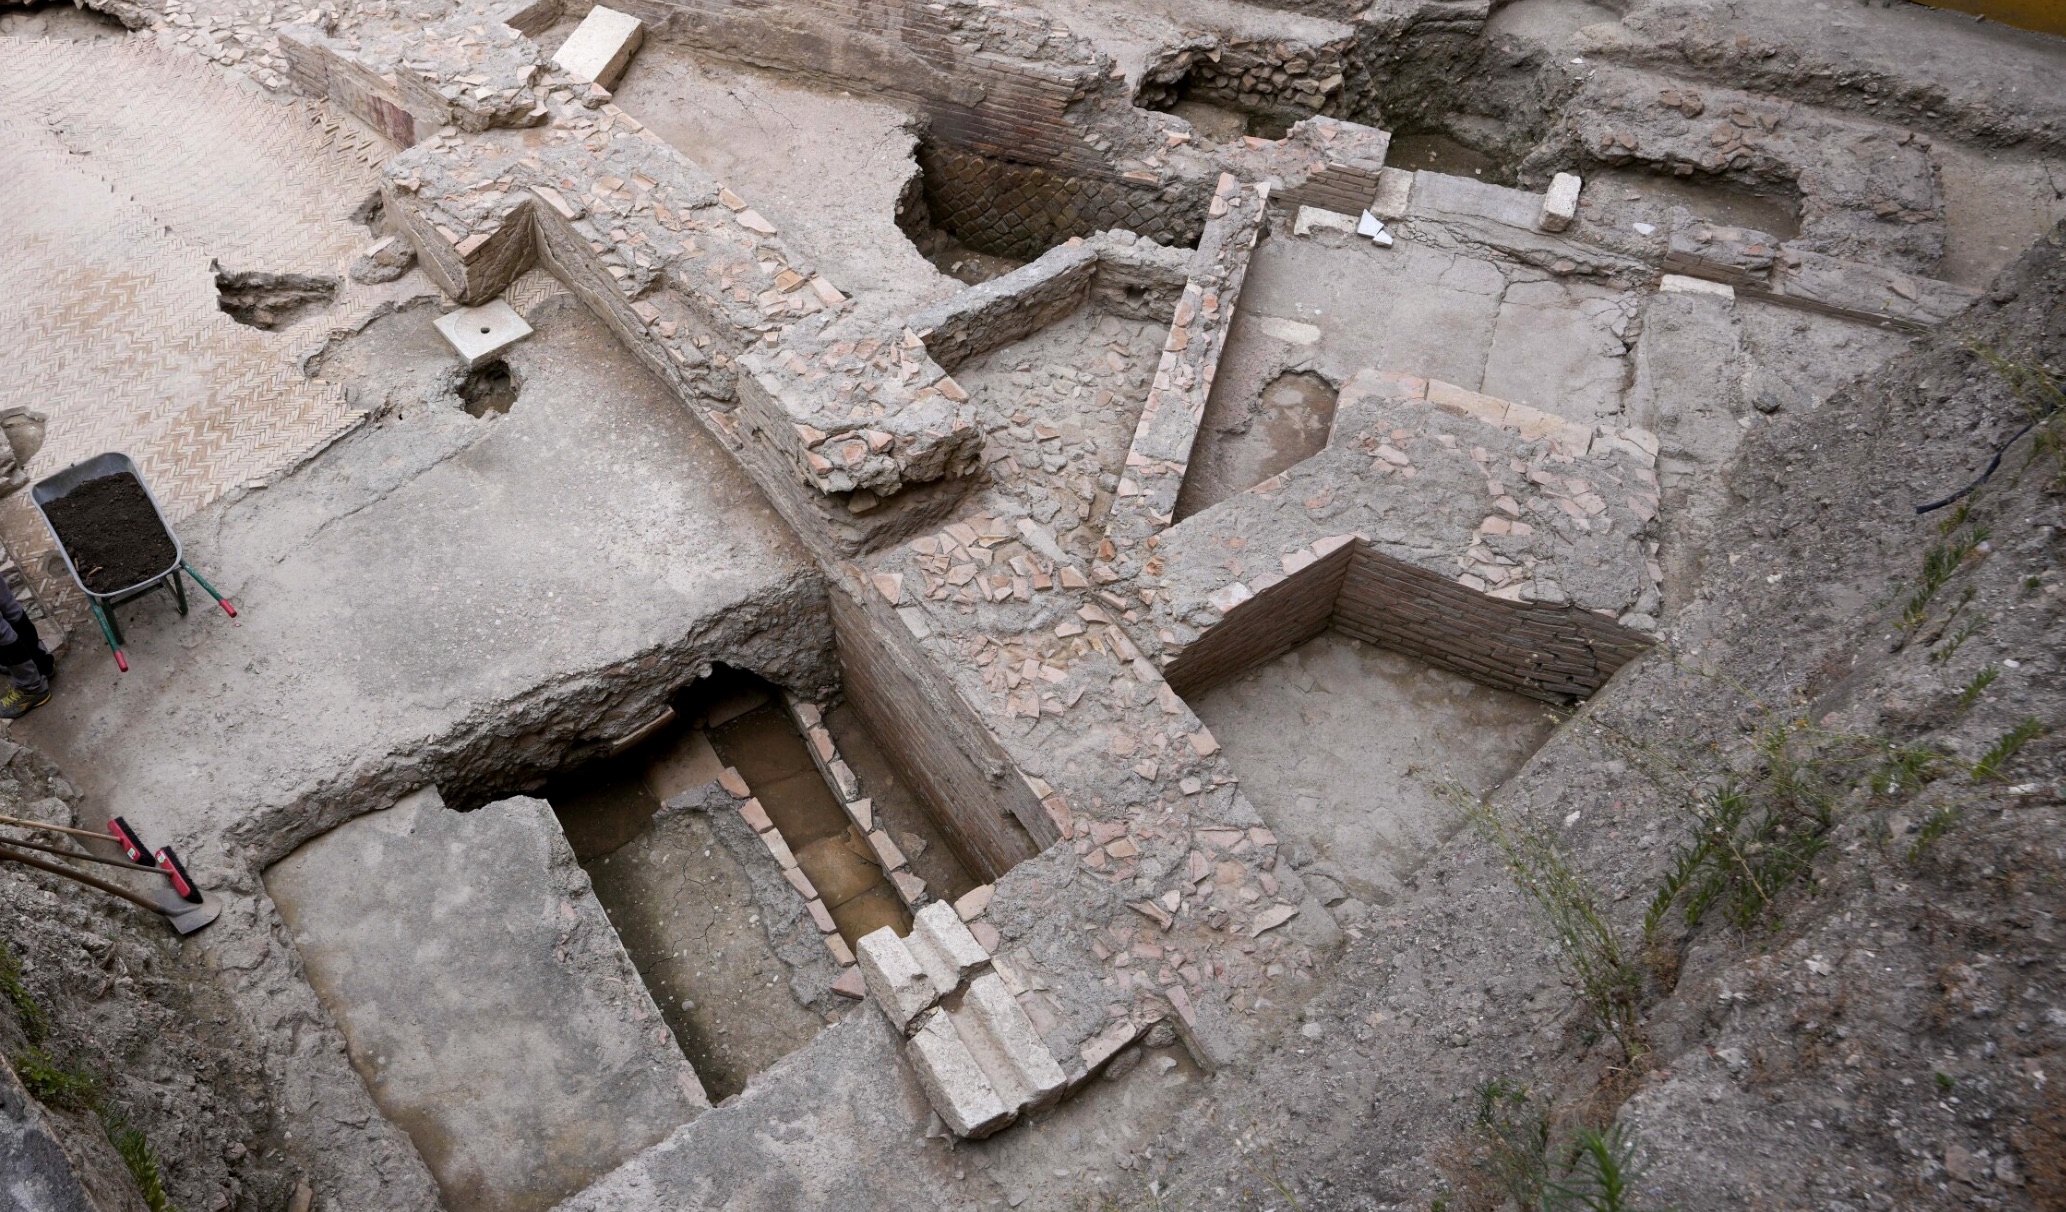 Ruins of ancient Nero's Theater discovered. Credit: AP Photo/Andrew Medichini.